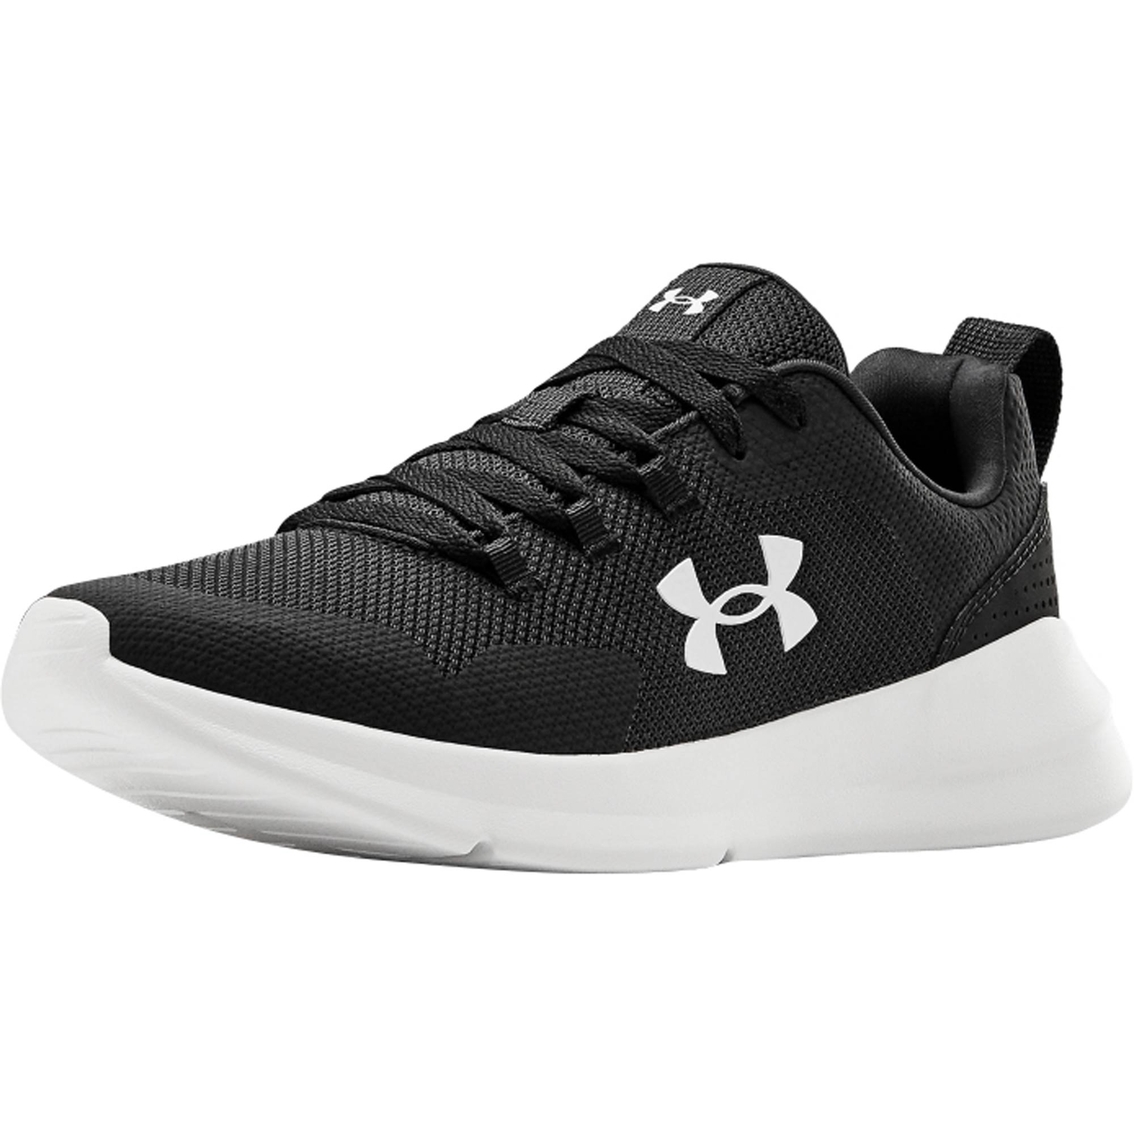 Under Armour Men's Ua Essential Sportstyle Shoes | Sneakers | Shoes ...